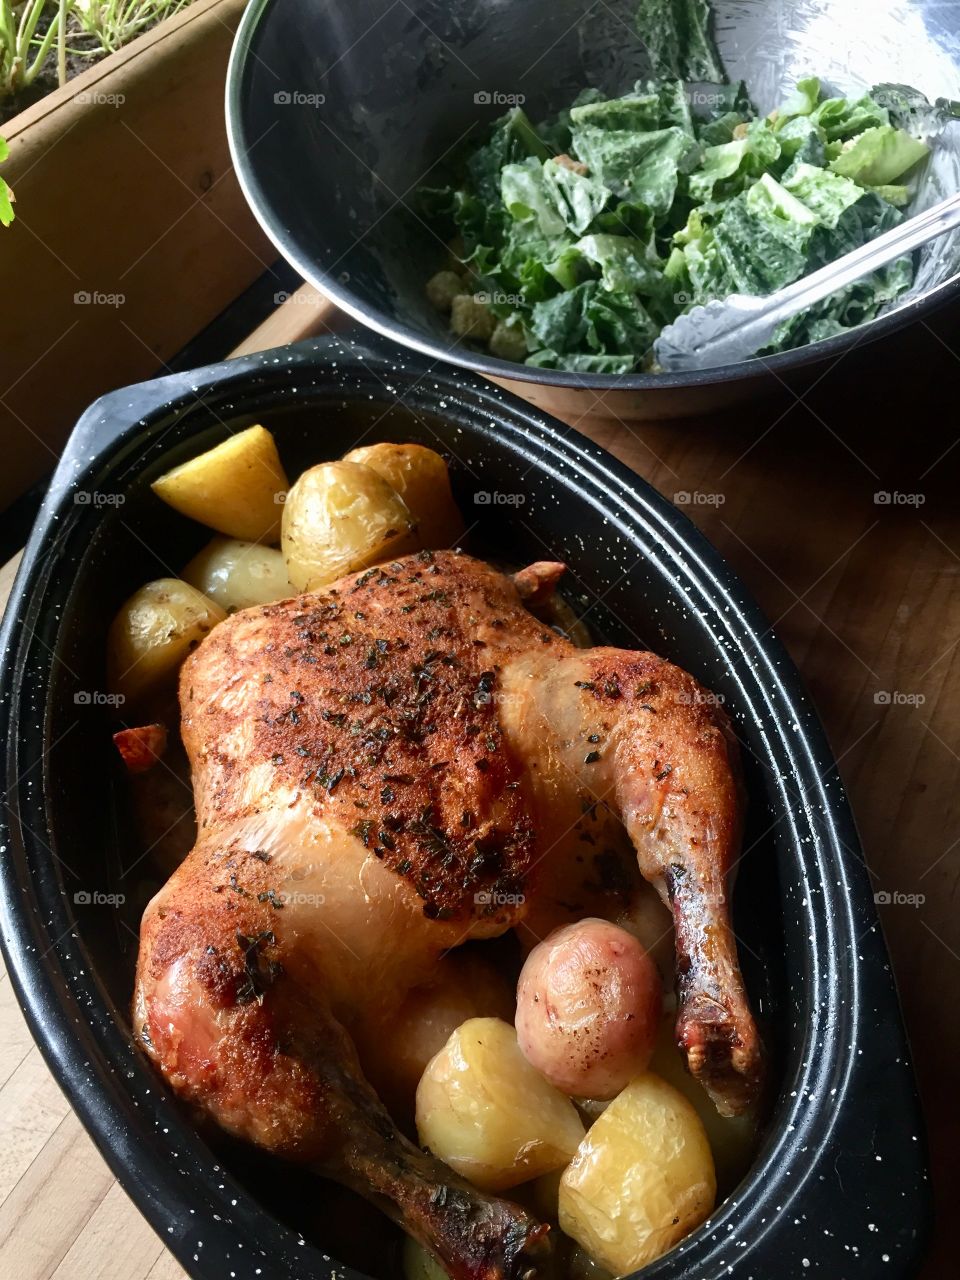 Winner, winner Chicken dinner. Probably the easiest home cooked meal to make. Add chicken to roast pot with onions, potatoes spices add 1 cup of water and simmer with the lid on, atop the woodstove for 3 hours. 